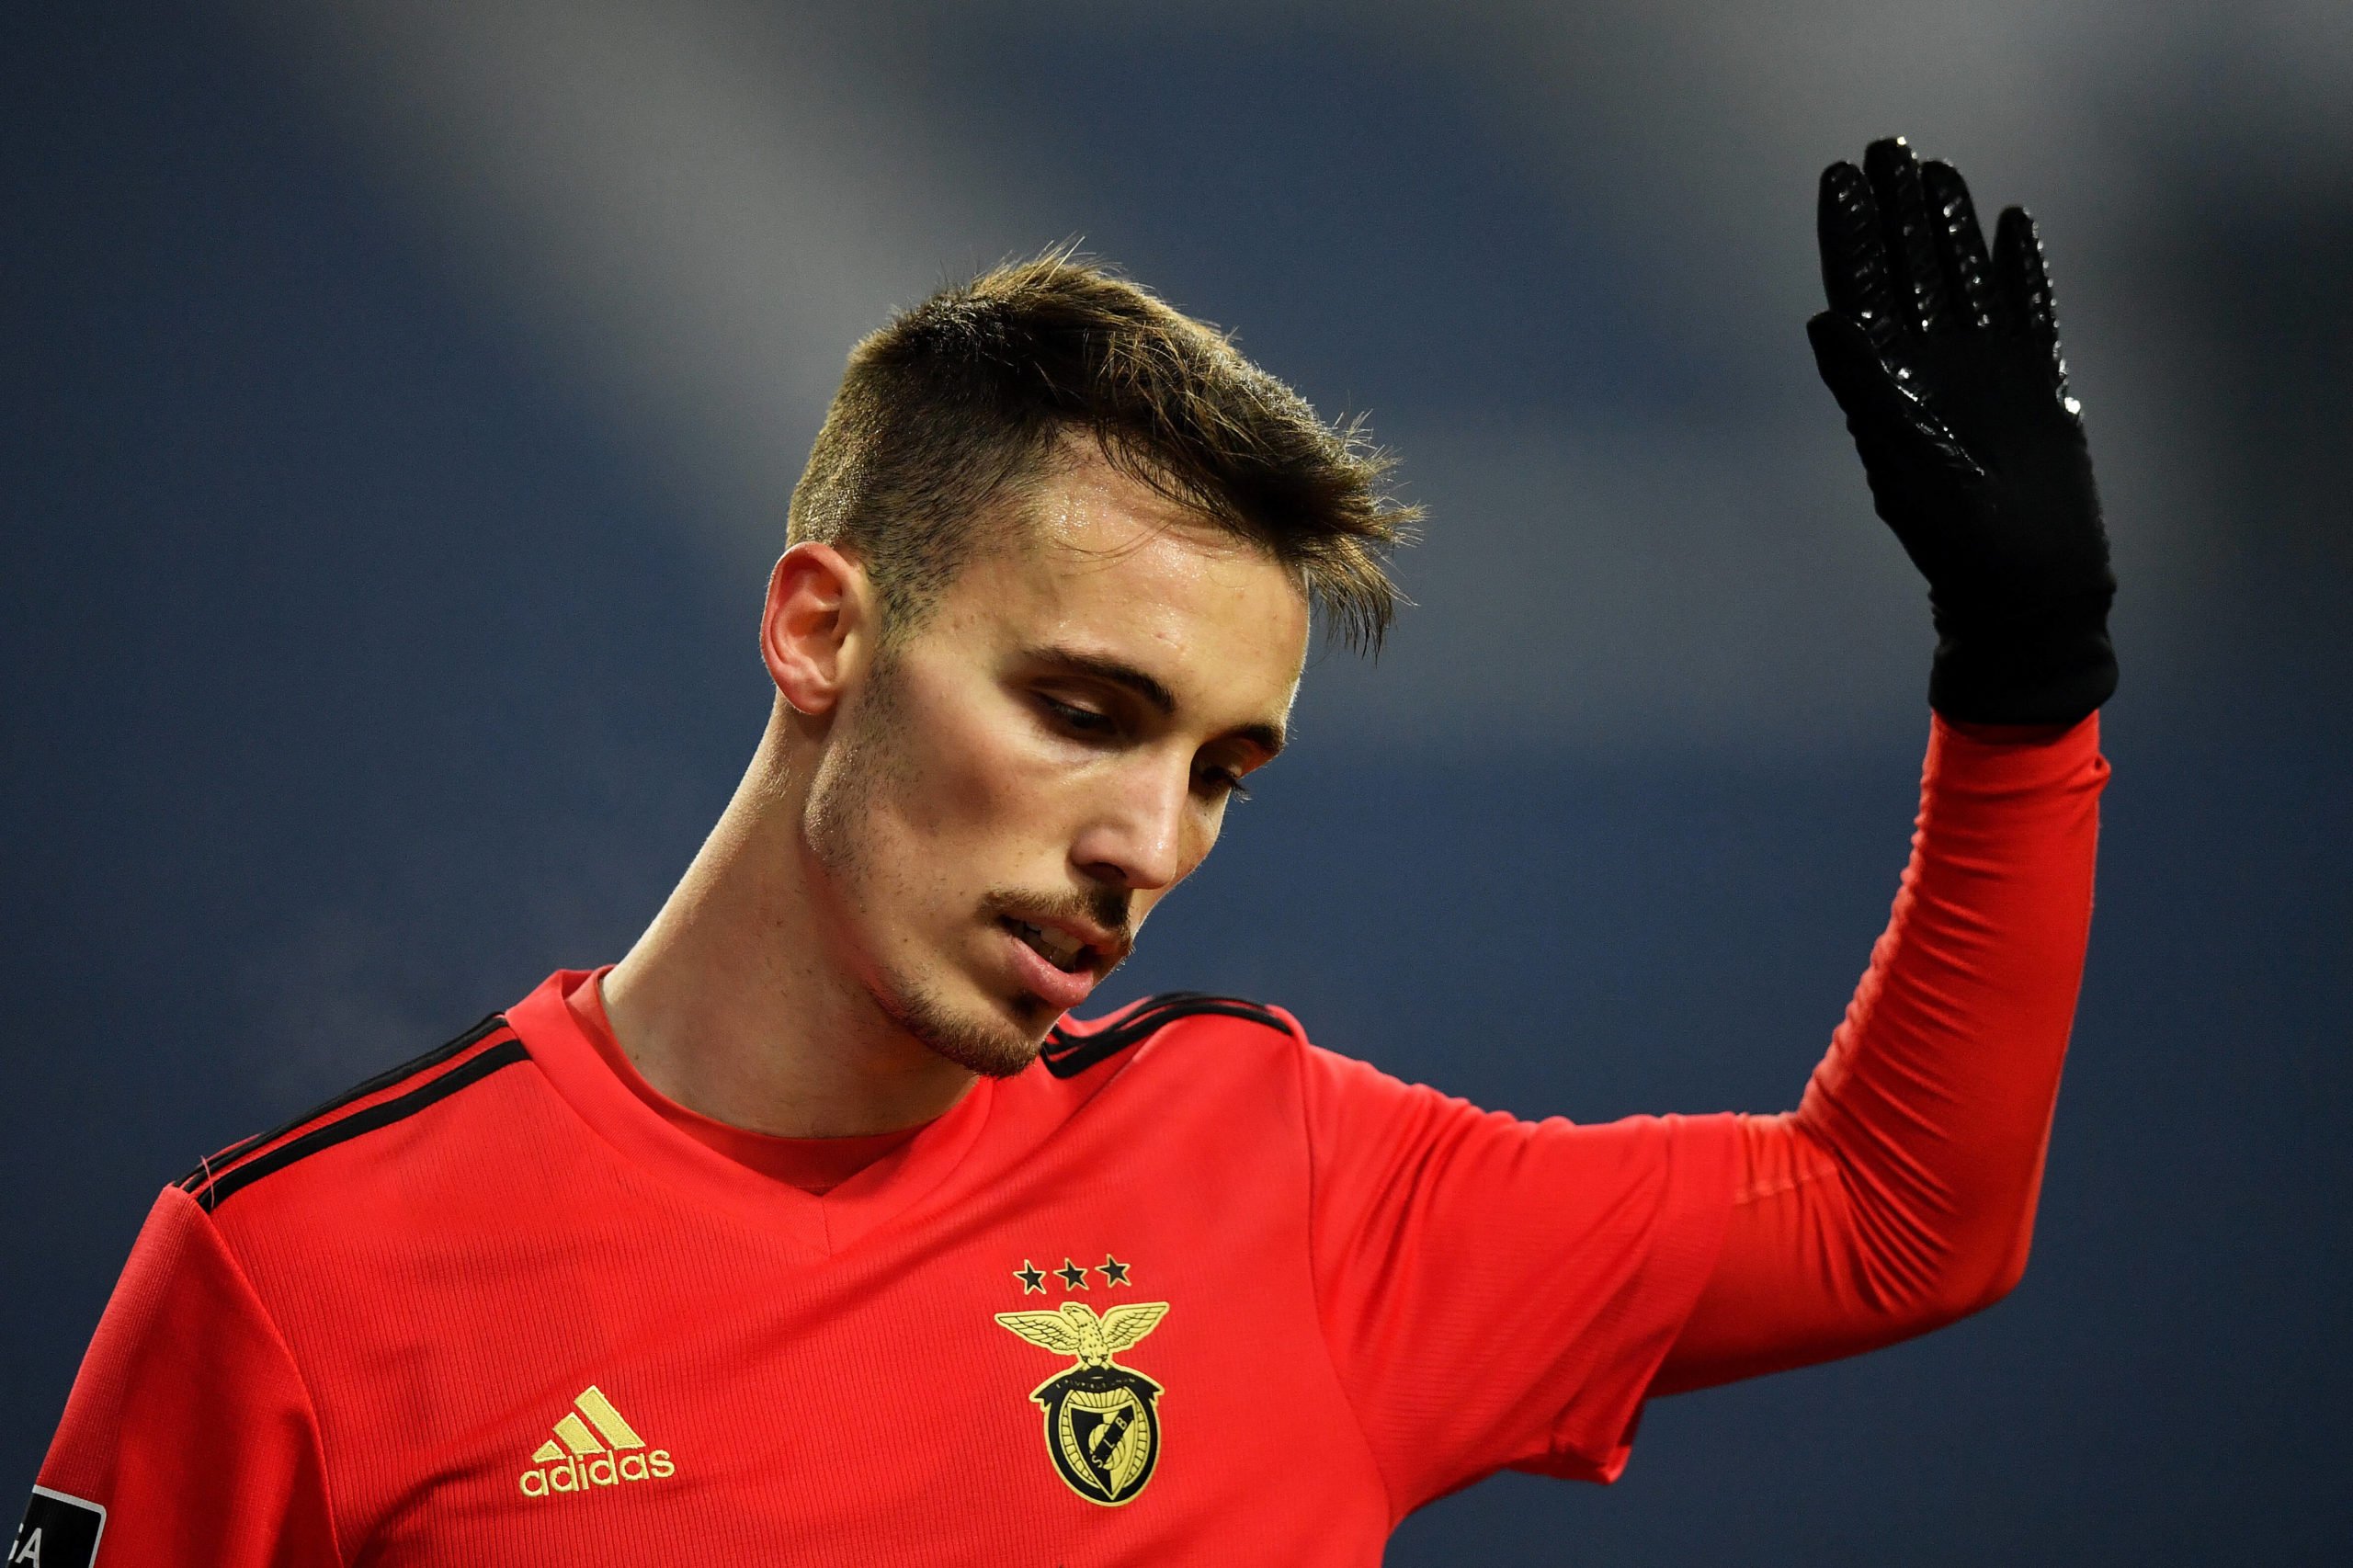 Manchester City begin talks to land Grimaldo who is seen in the picture